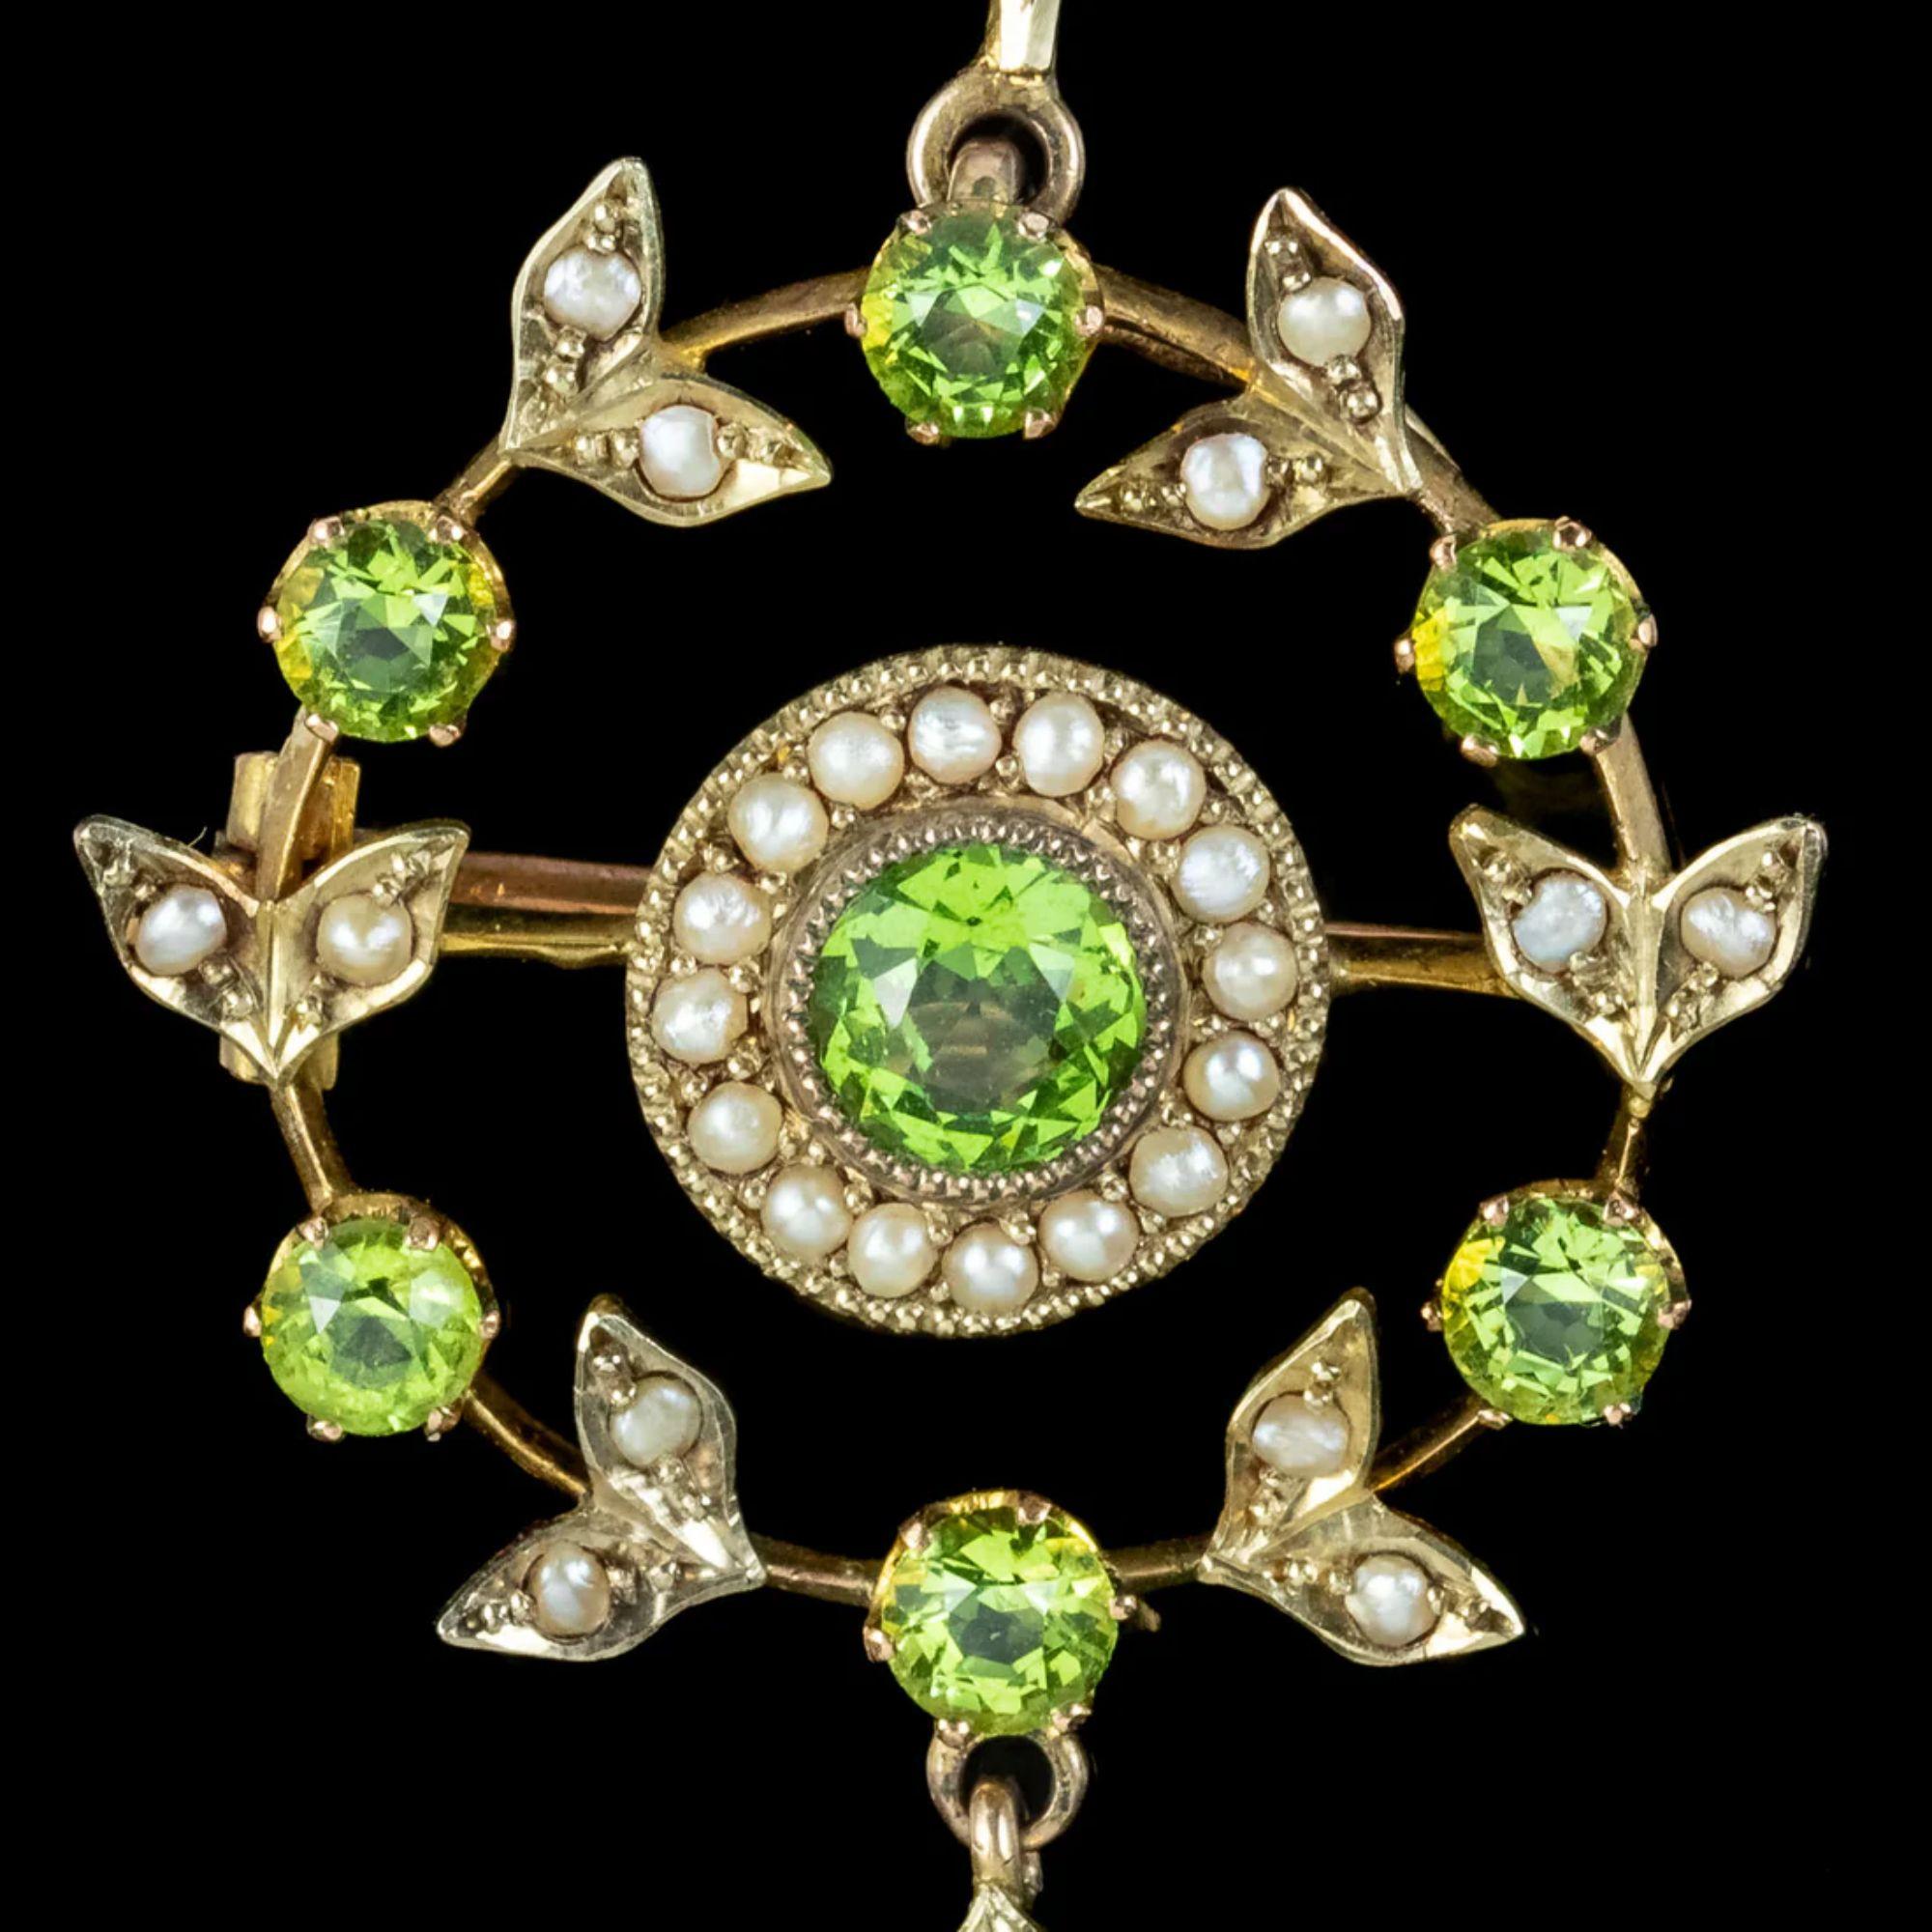 Antique Edwardian Peridot Pearl Pendant 9ct Gold, circa 1901-1915 In Good Condition For Sale In Kendal, GB